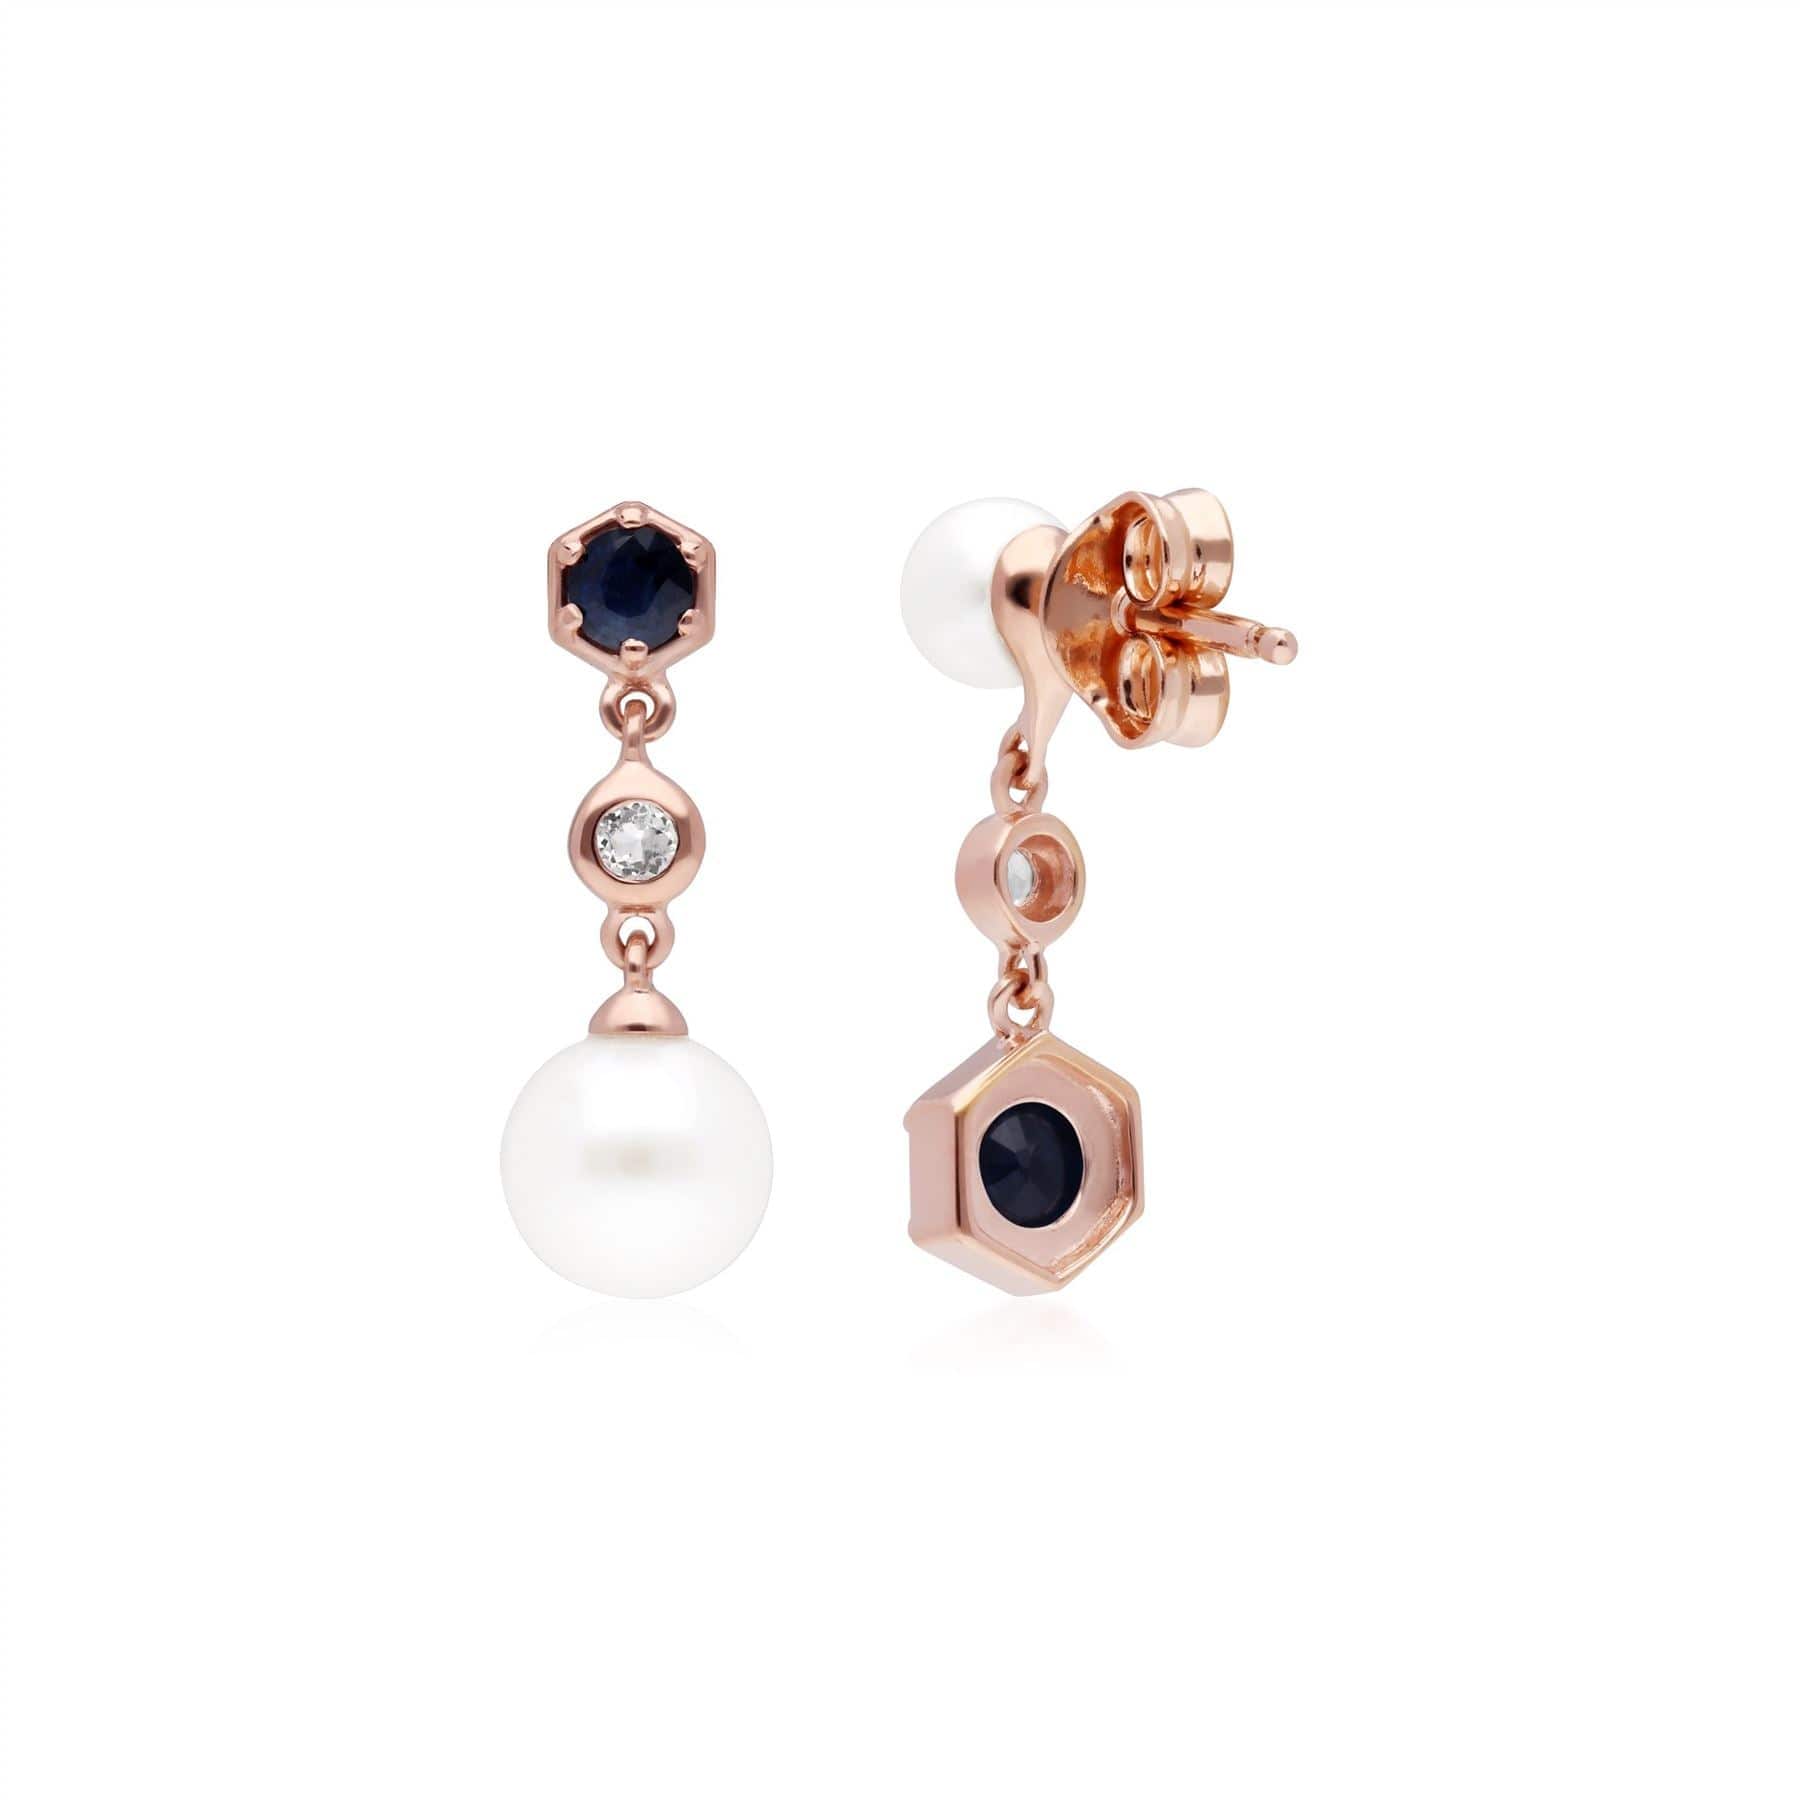 Modern Pearl, Sapphire & Topaz Mismatched Drop Earrings in Rose Gold Plated Sterling Silver 1